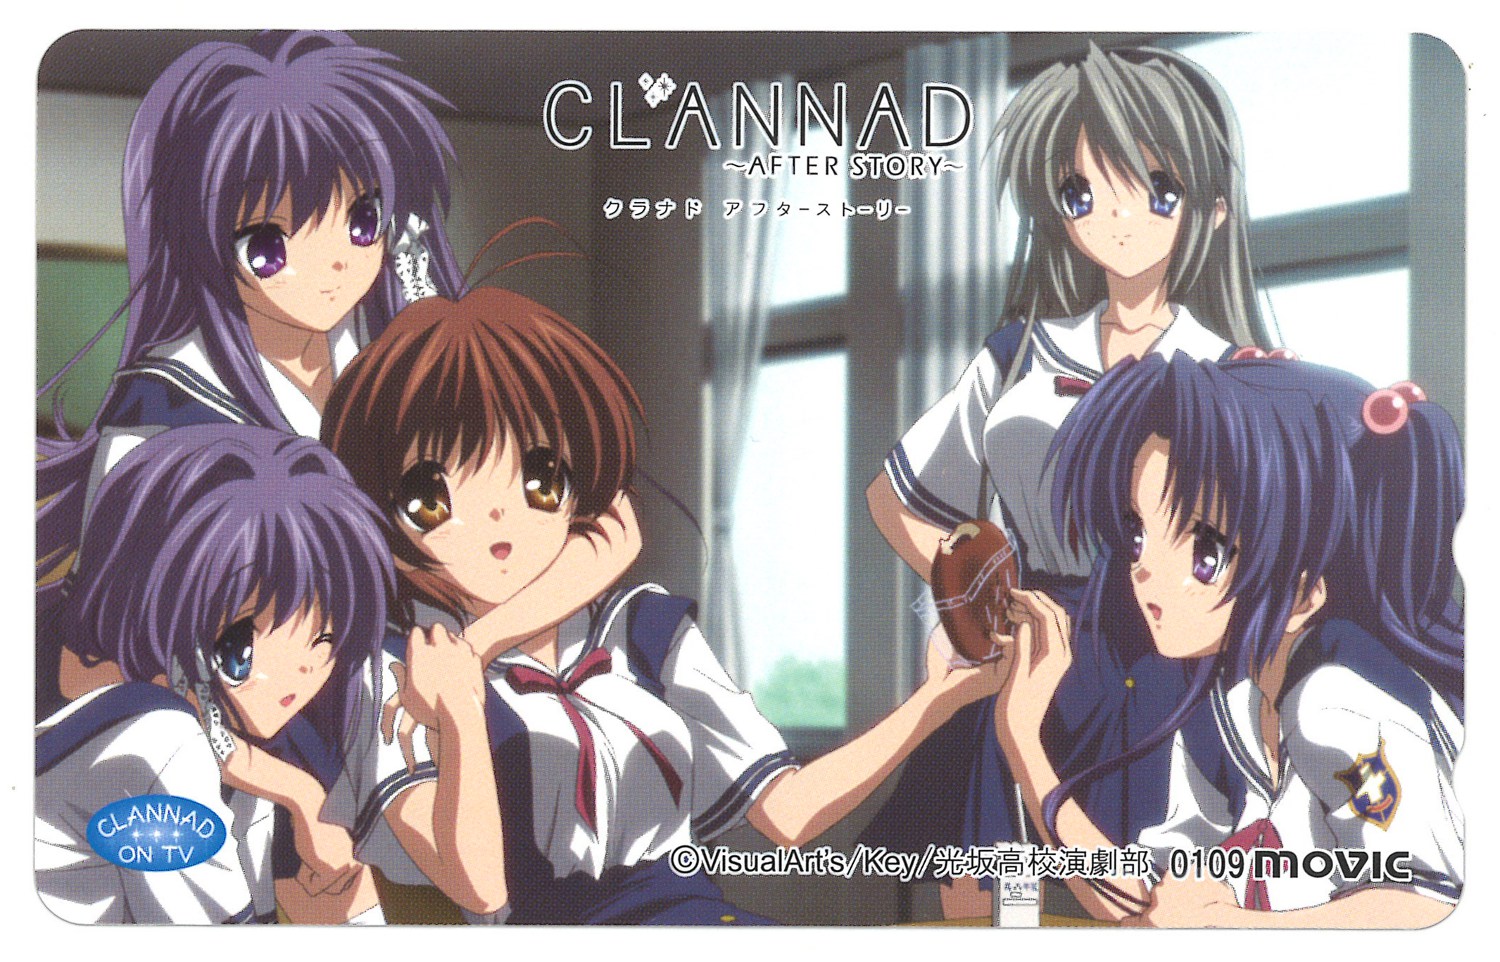 Best Buy: Clannad: After Story Complete Collection [4 Discs] [DVD]